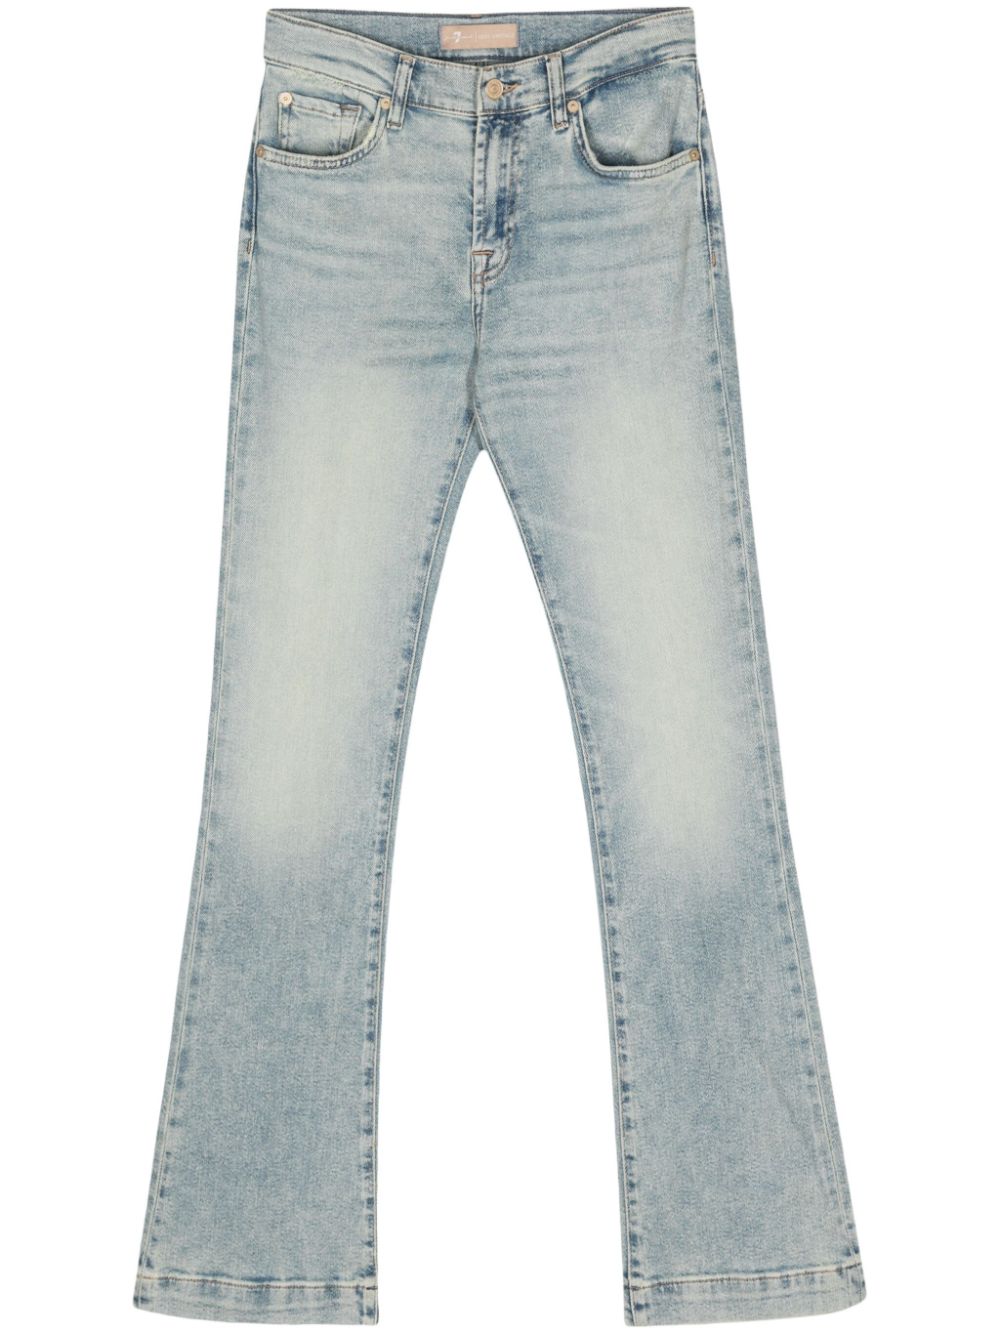 7 For All Mankind 7 FOR ALL MANKIND- Bootcut Tailorless Denim Jeans